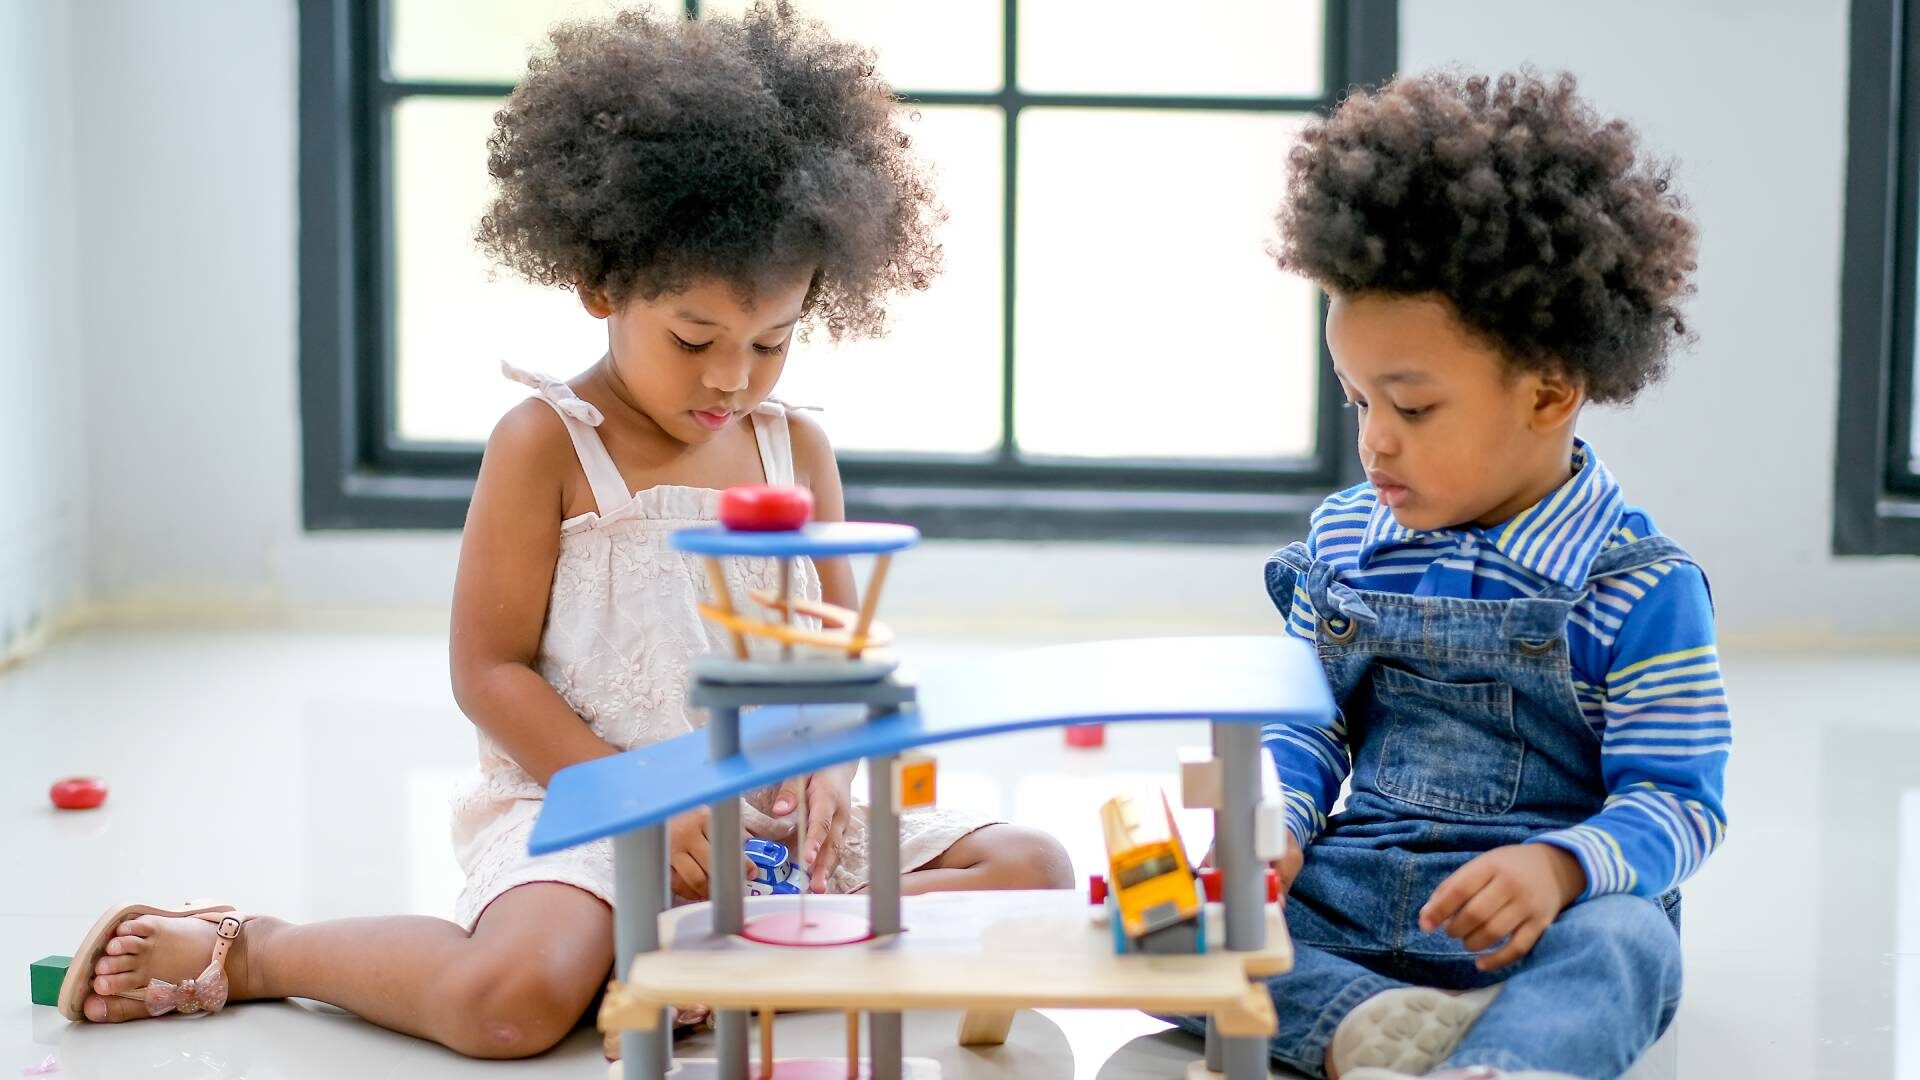 A little girl and her brother sit on the floor in a white room and play together with a toy building, bus, and blocks.